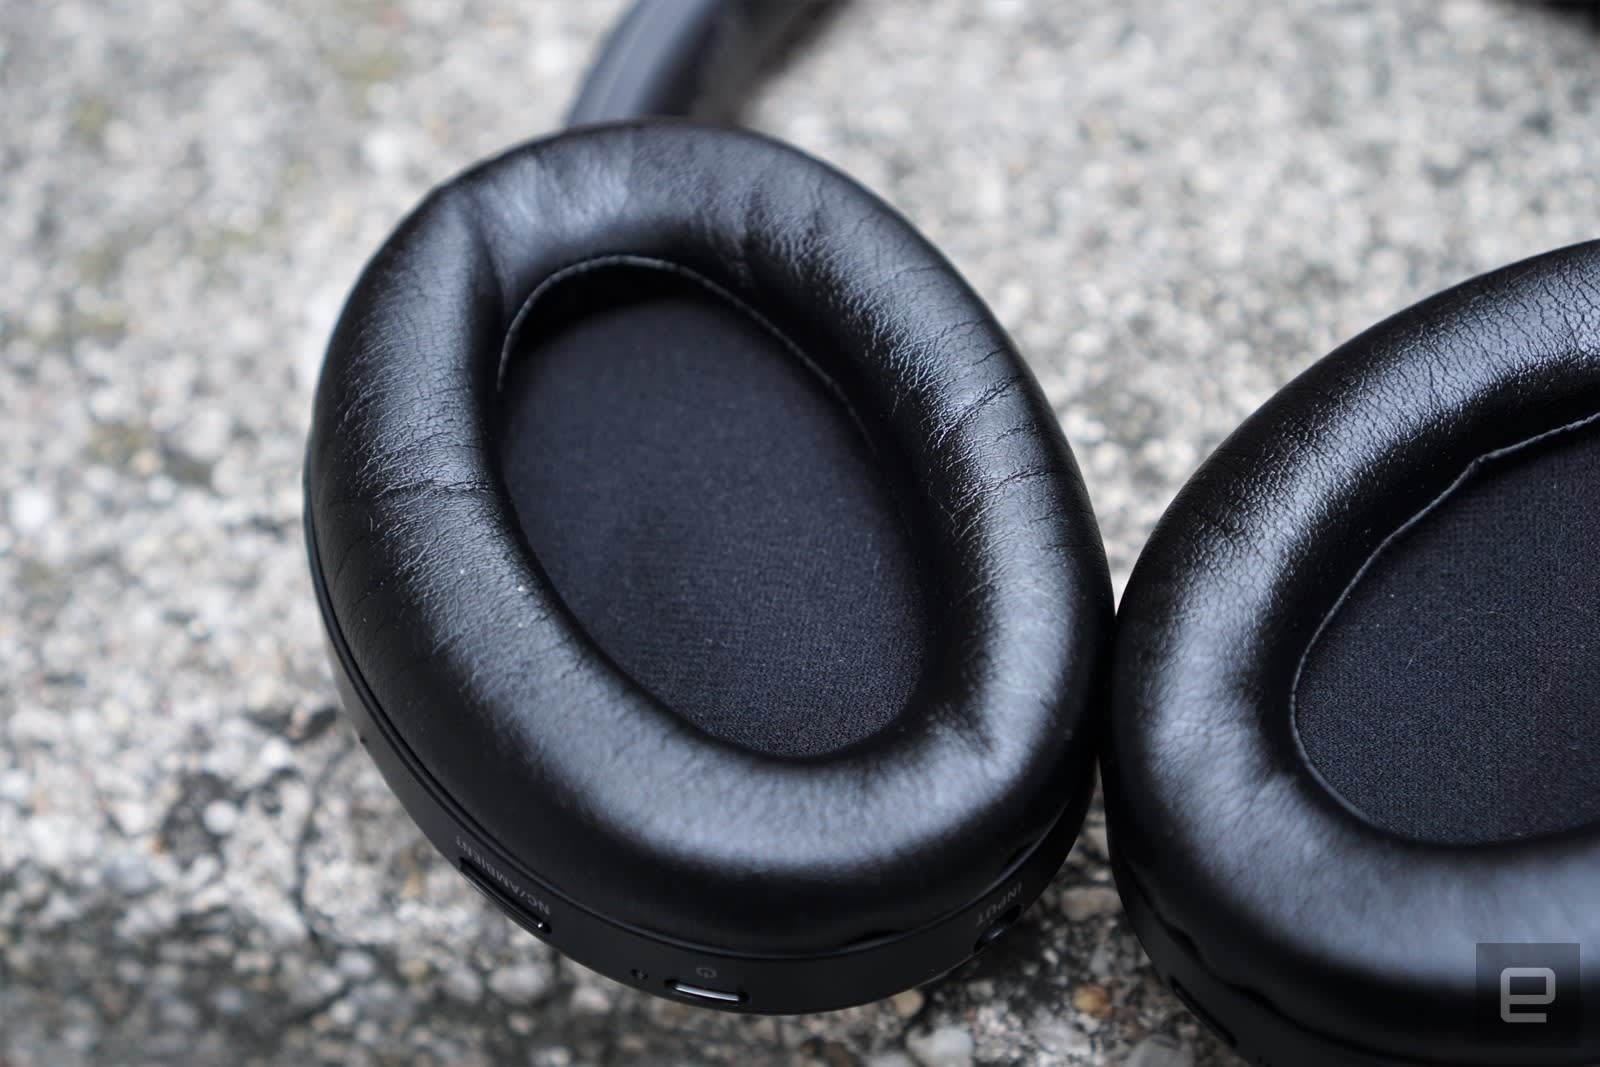 Sony WH-1000XM3 headphones review: Goodbye, Bose | Engadget - 